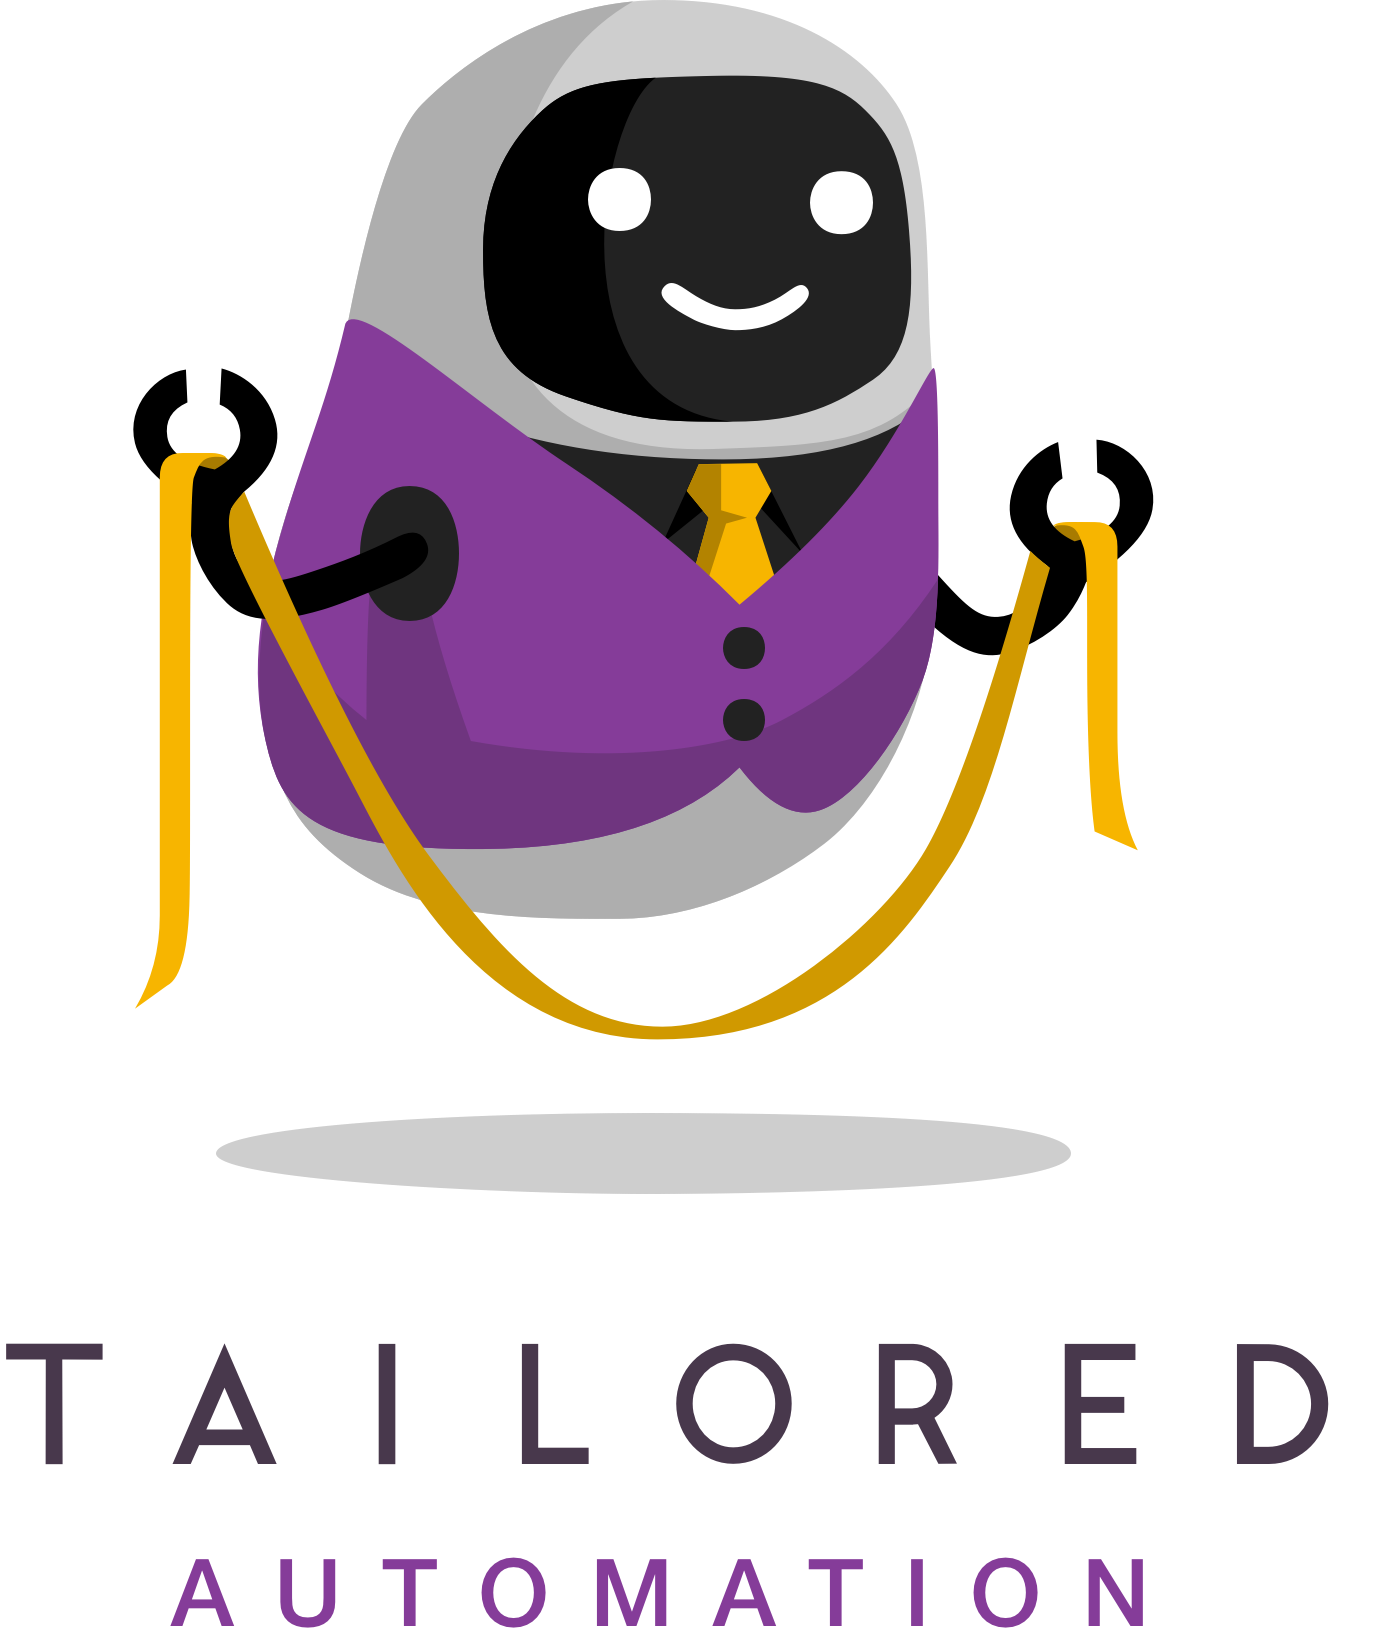 Tailored Automation